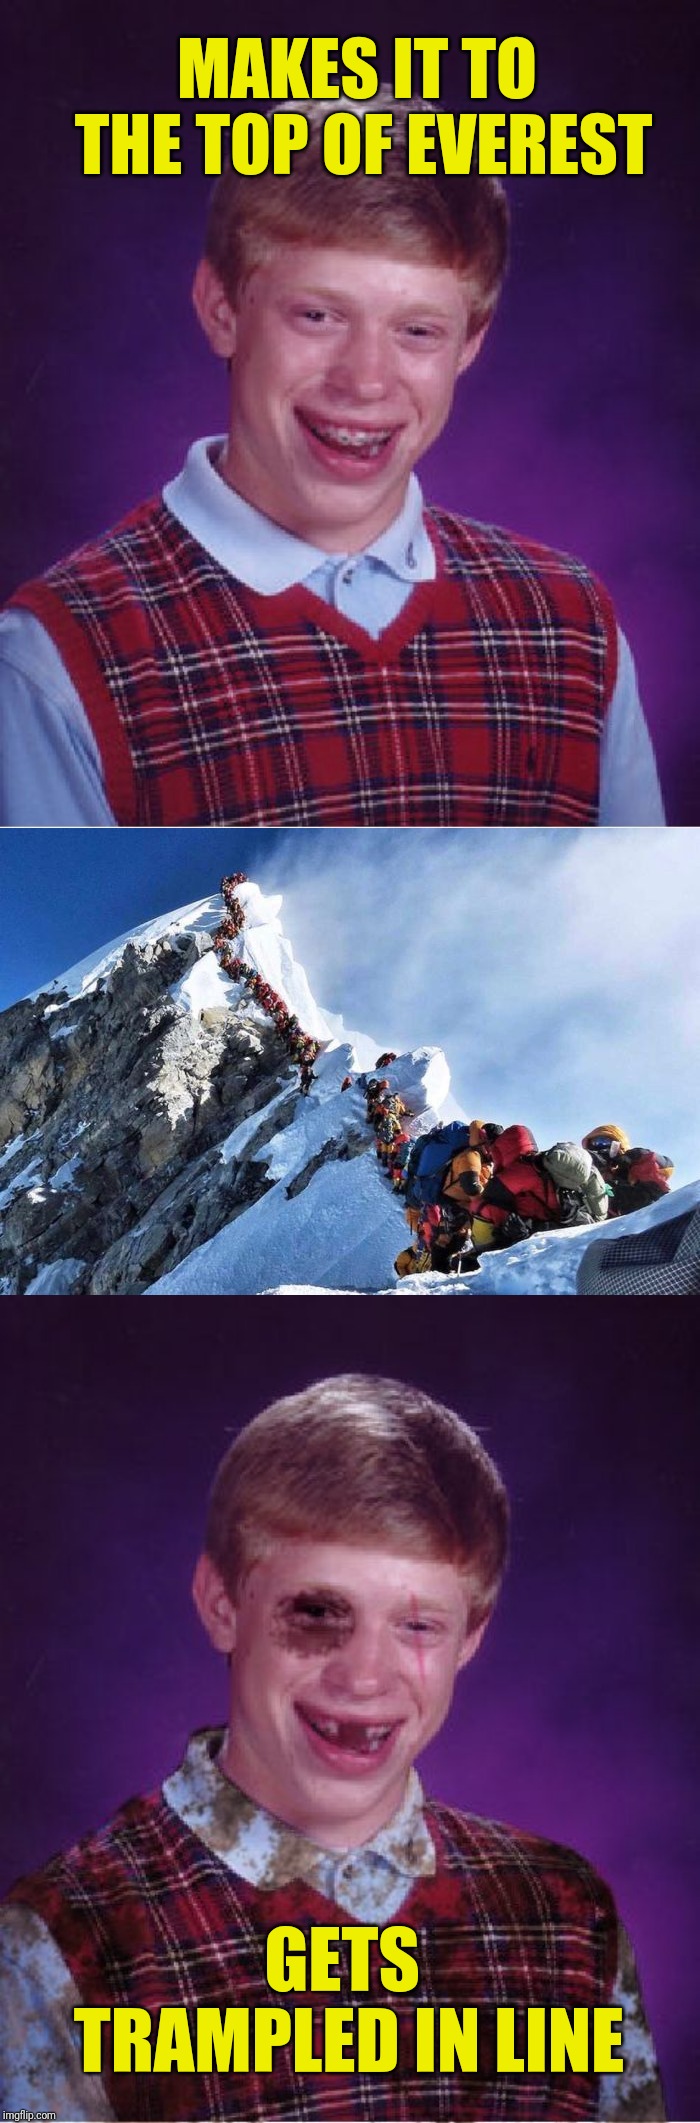 It's rough up there | MAKES IT TO THE TOP OF EVEREST; GETS TRAMPLED IN LINE | image tagged in memes,bad luck brian,beat-up bad luck brian,funny,mount everest,first world problems | made w/ Imgflip meme maker